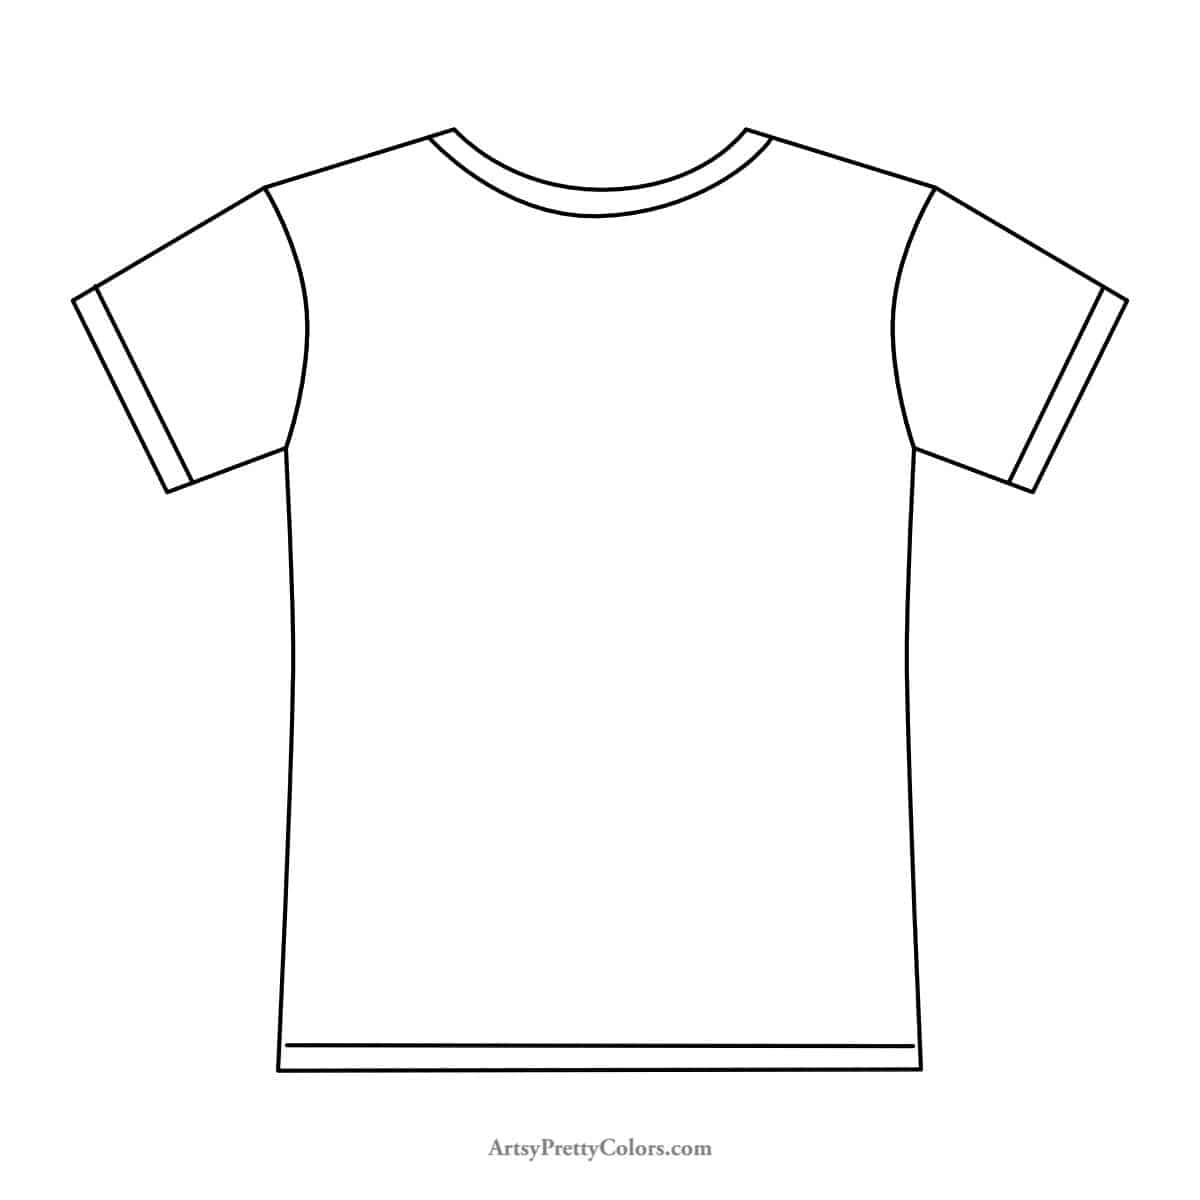 final line drawing of a shirt